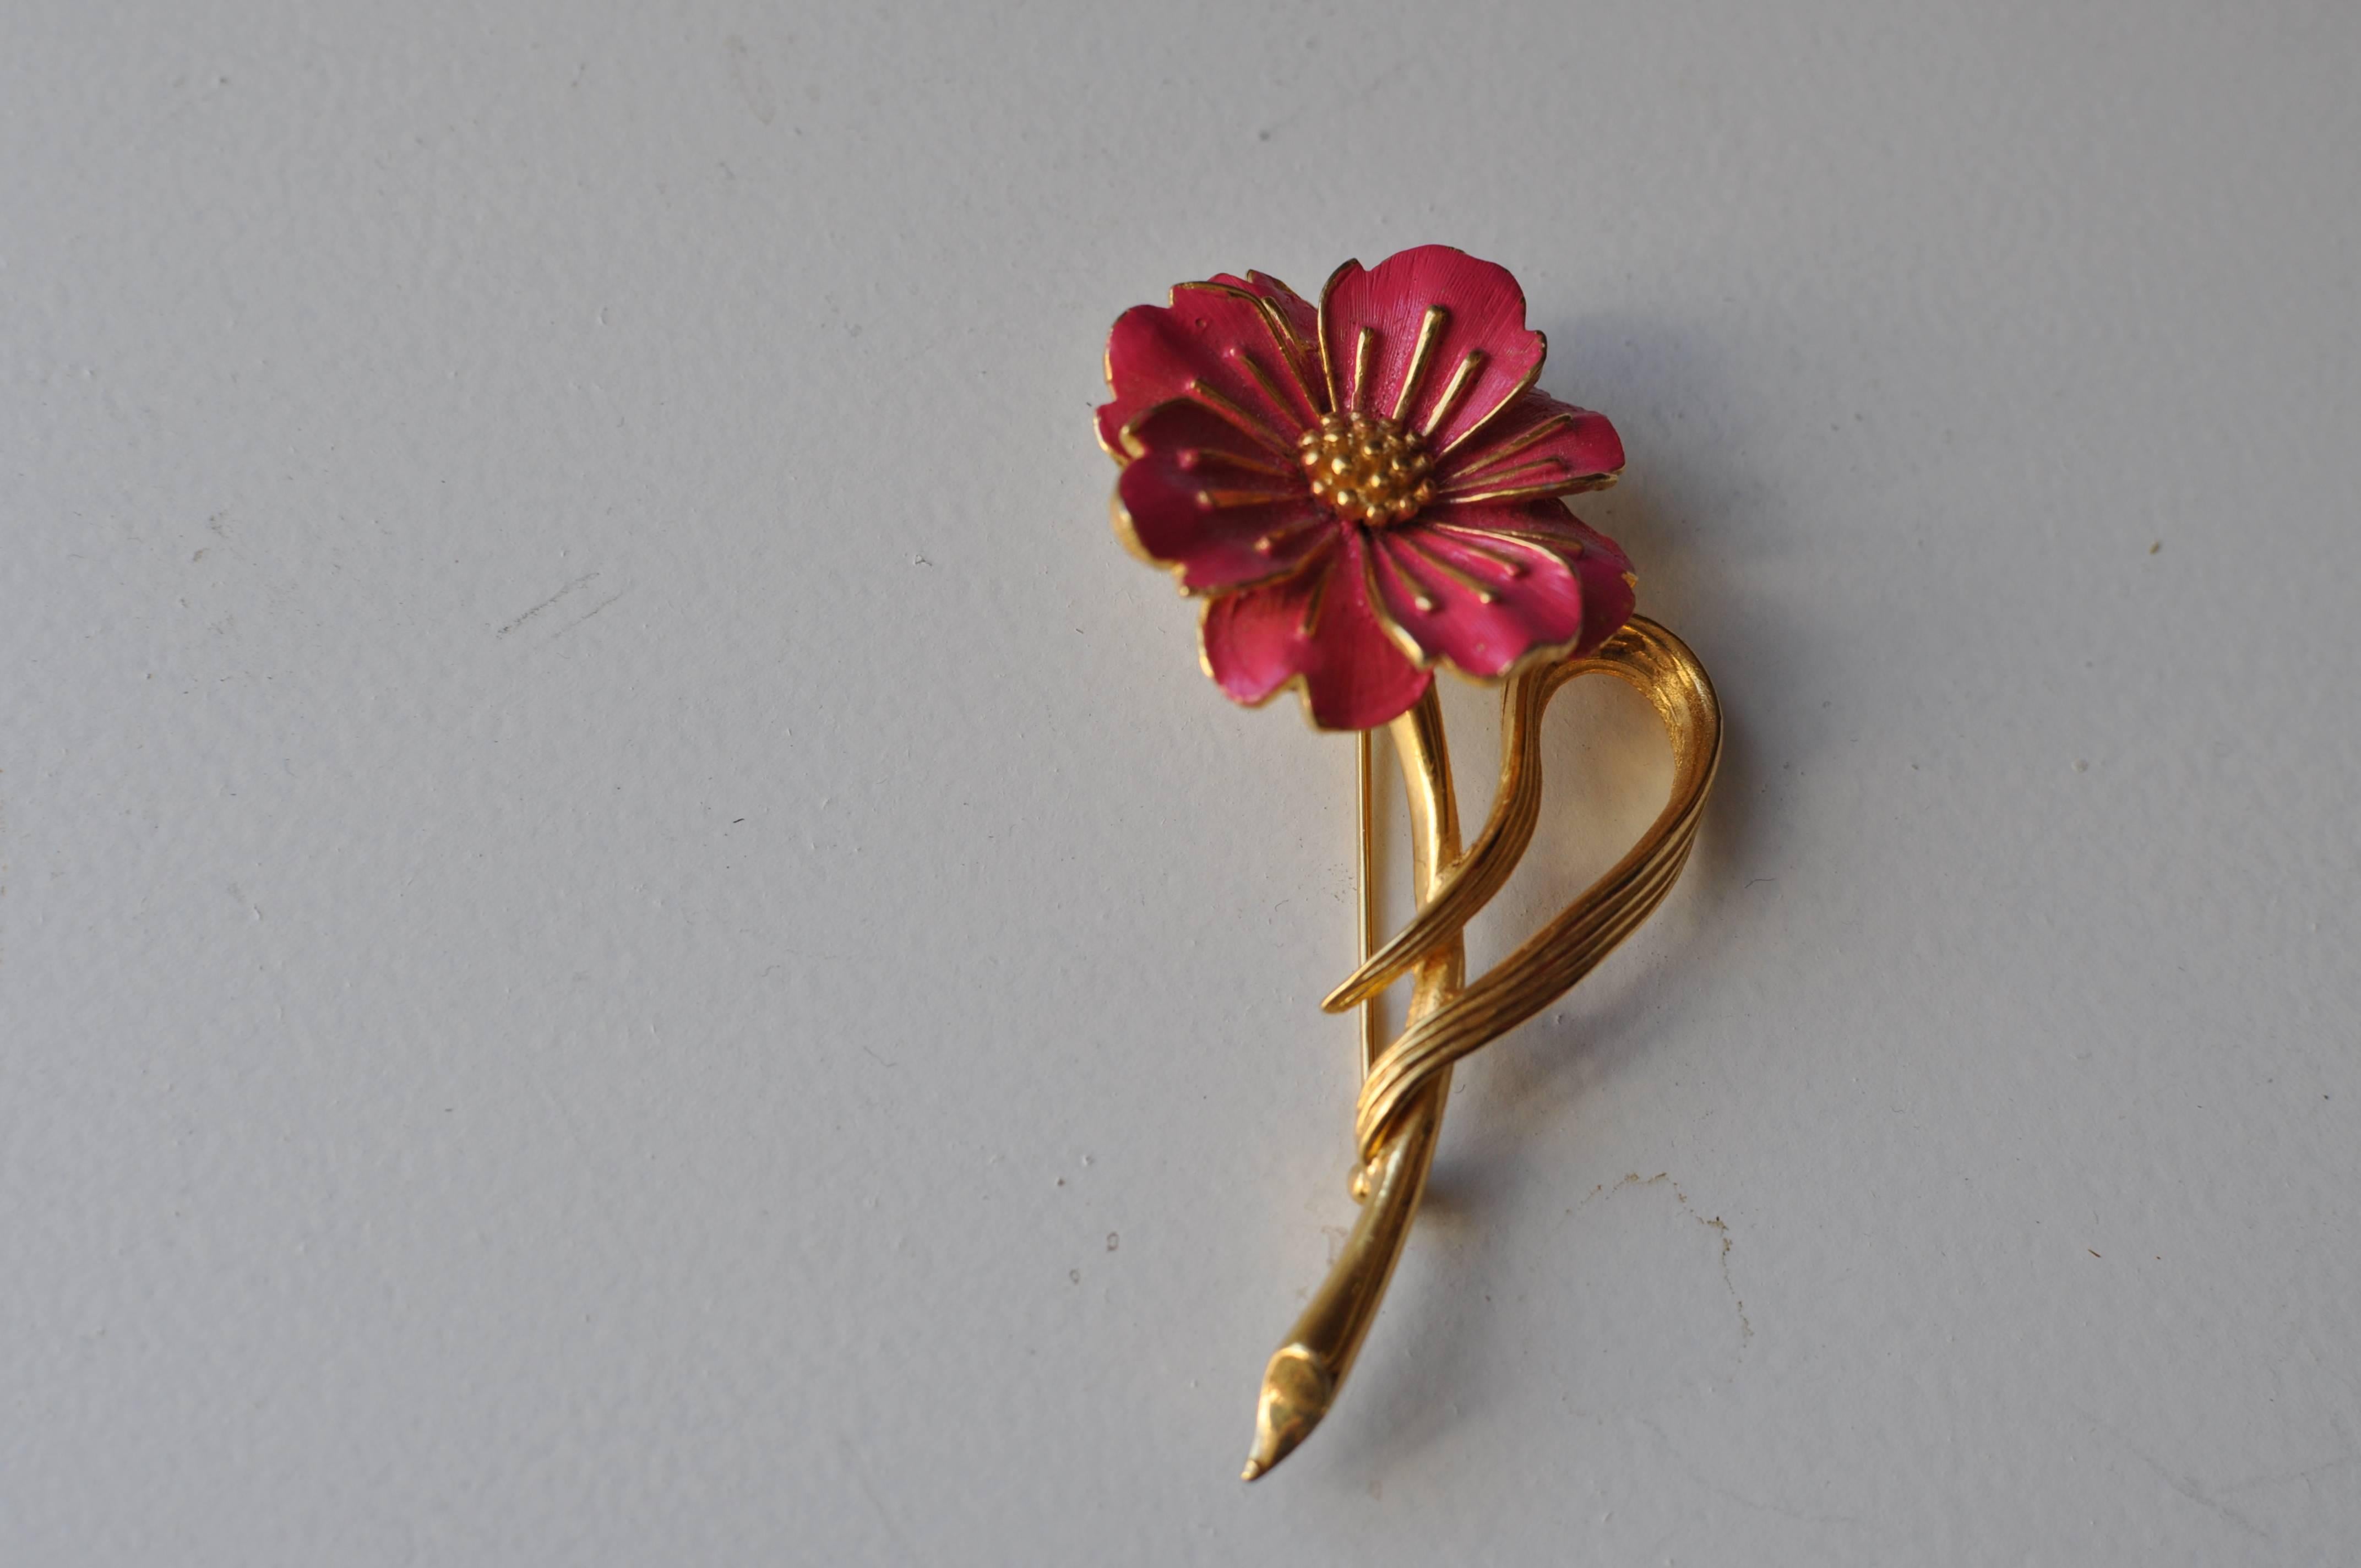 Gold tone brooch with rose colored enameled flower and gold accents. The long stem and swirly leaf make this a very attractive brooch.

The brooch is signed Boucher and the serial # 8739P